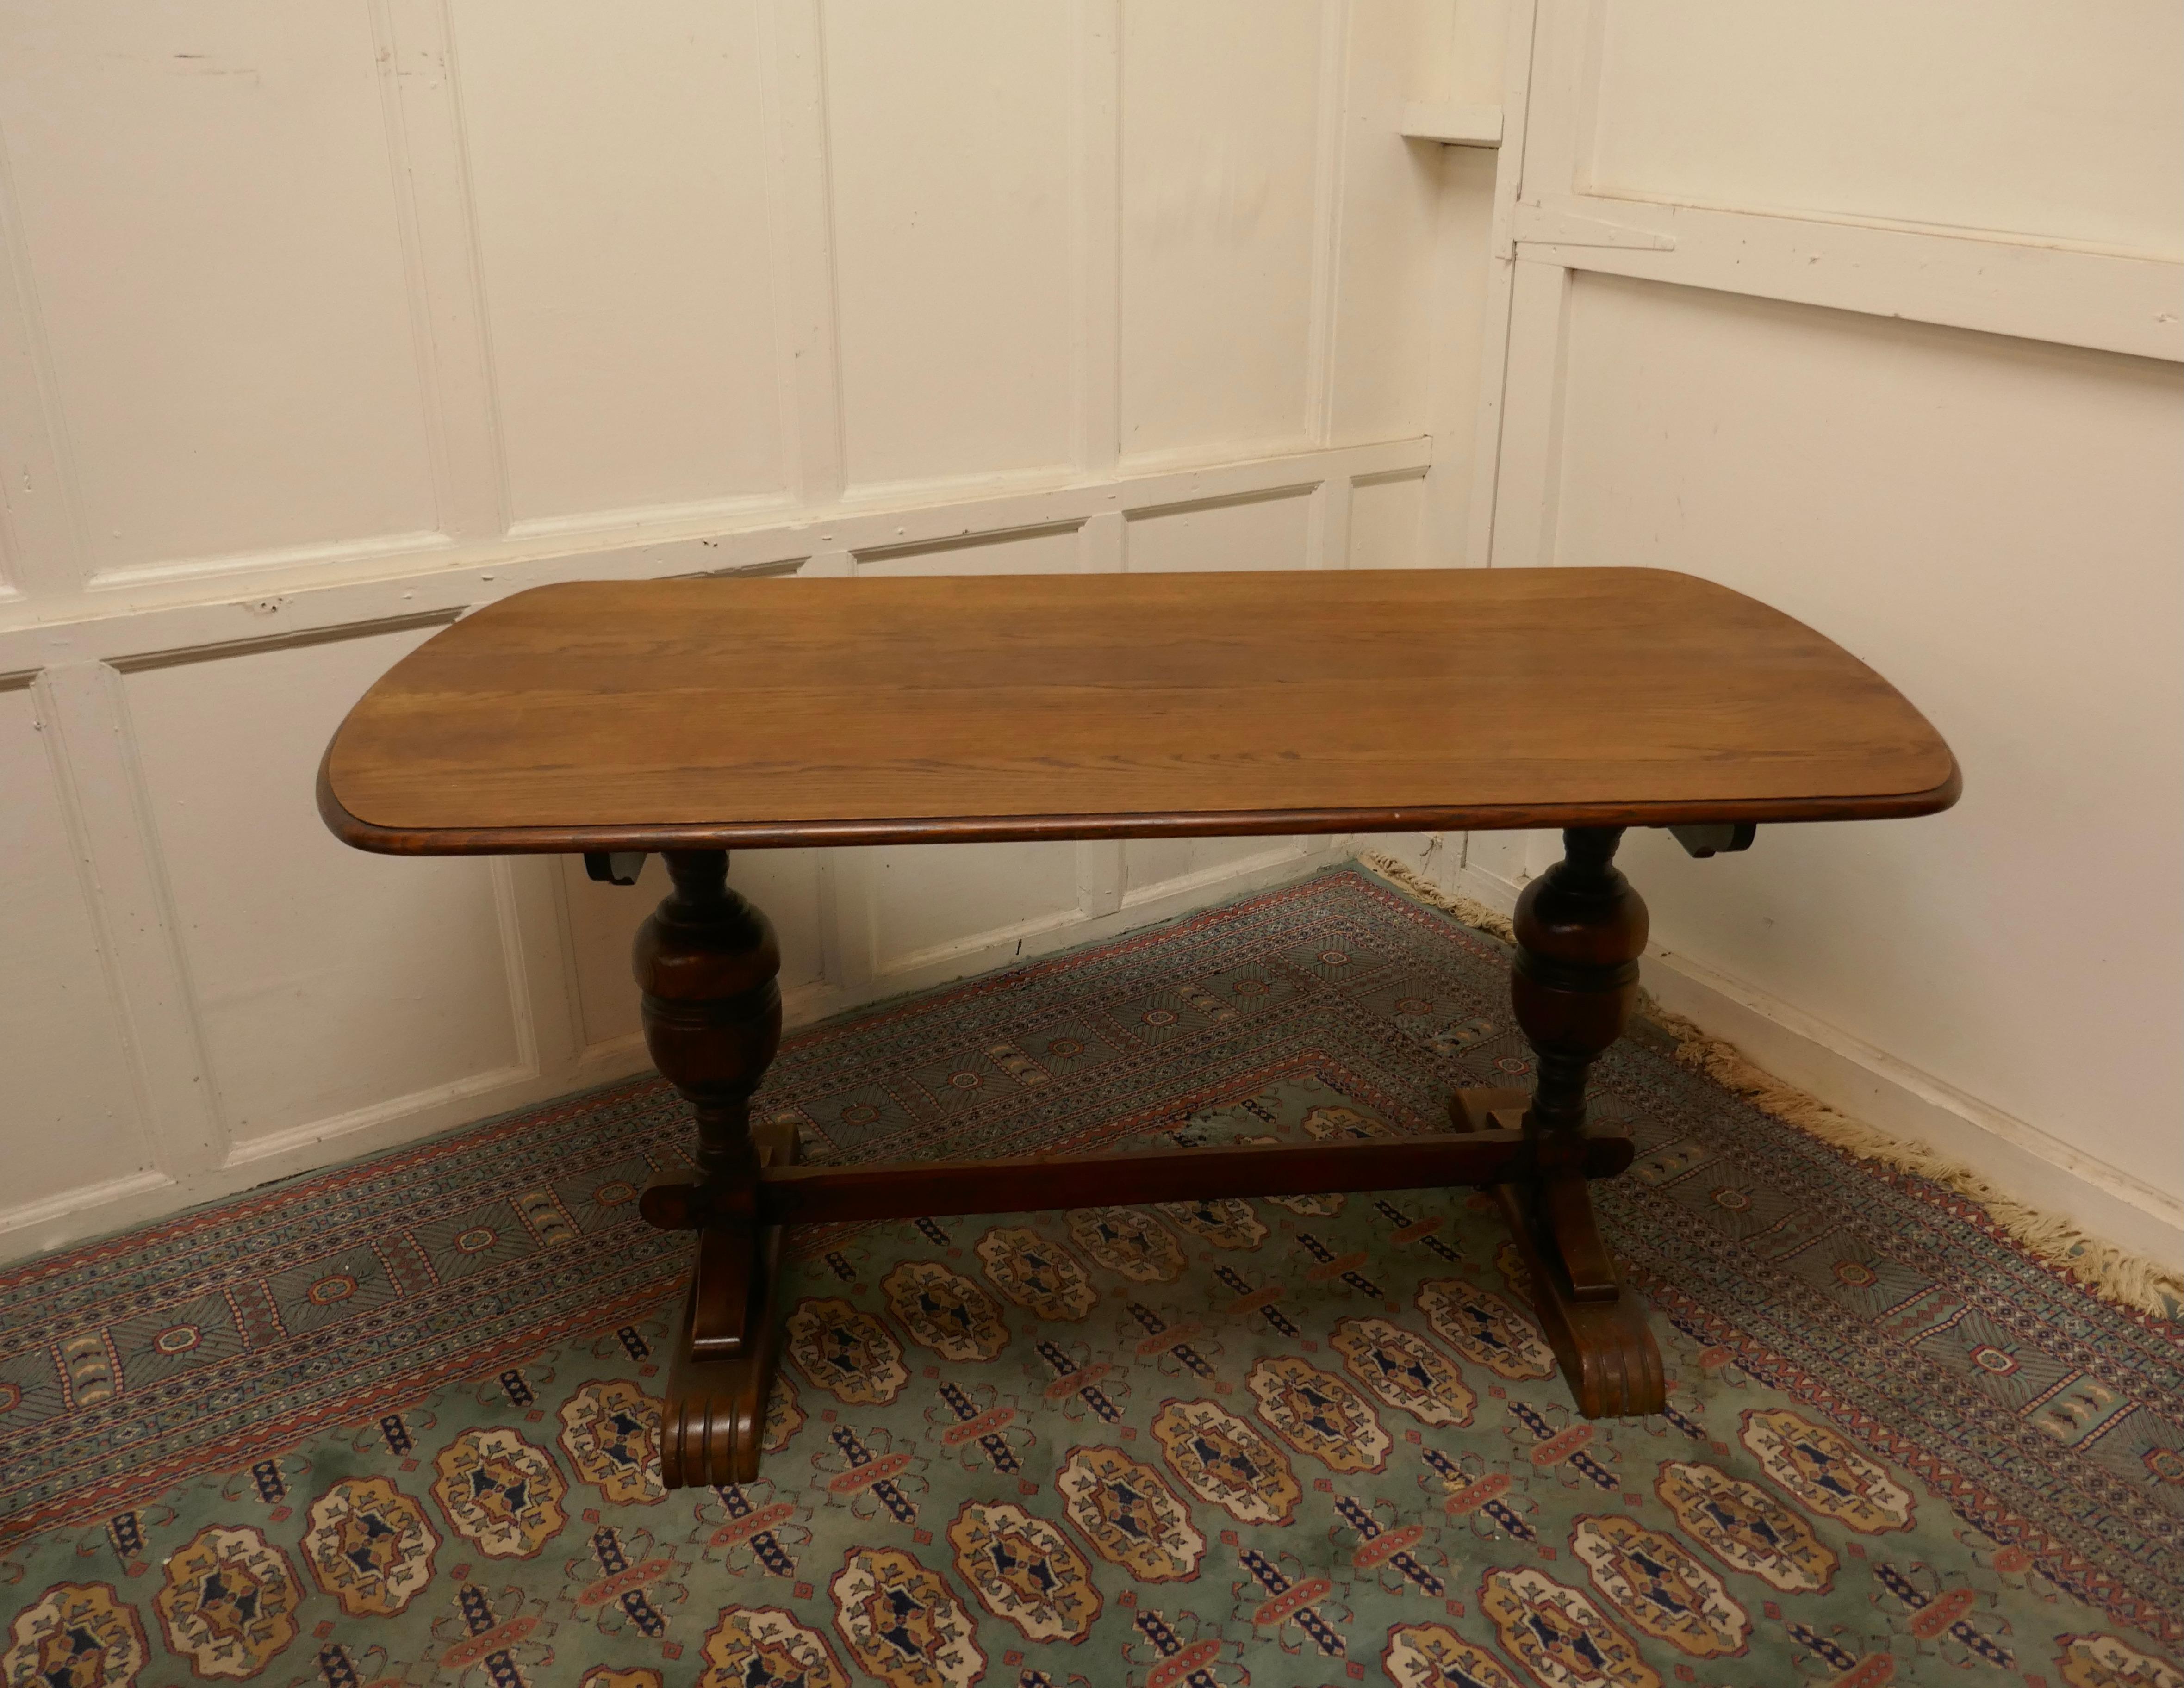 Good quality oak refectory dining table

This is a Superb piece it is a good quality Country oak table in the a refectory style, the table top has a moulded edge with a delightful shape, rectangular with a curved end (Squoval). The legs are chunky